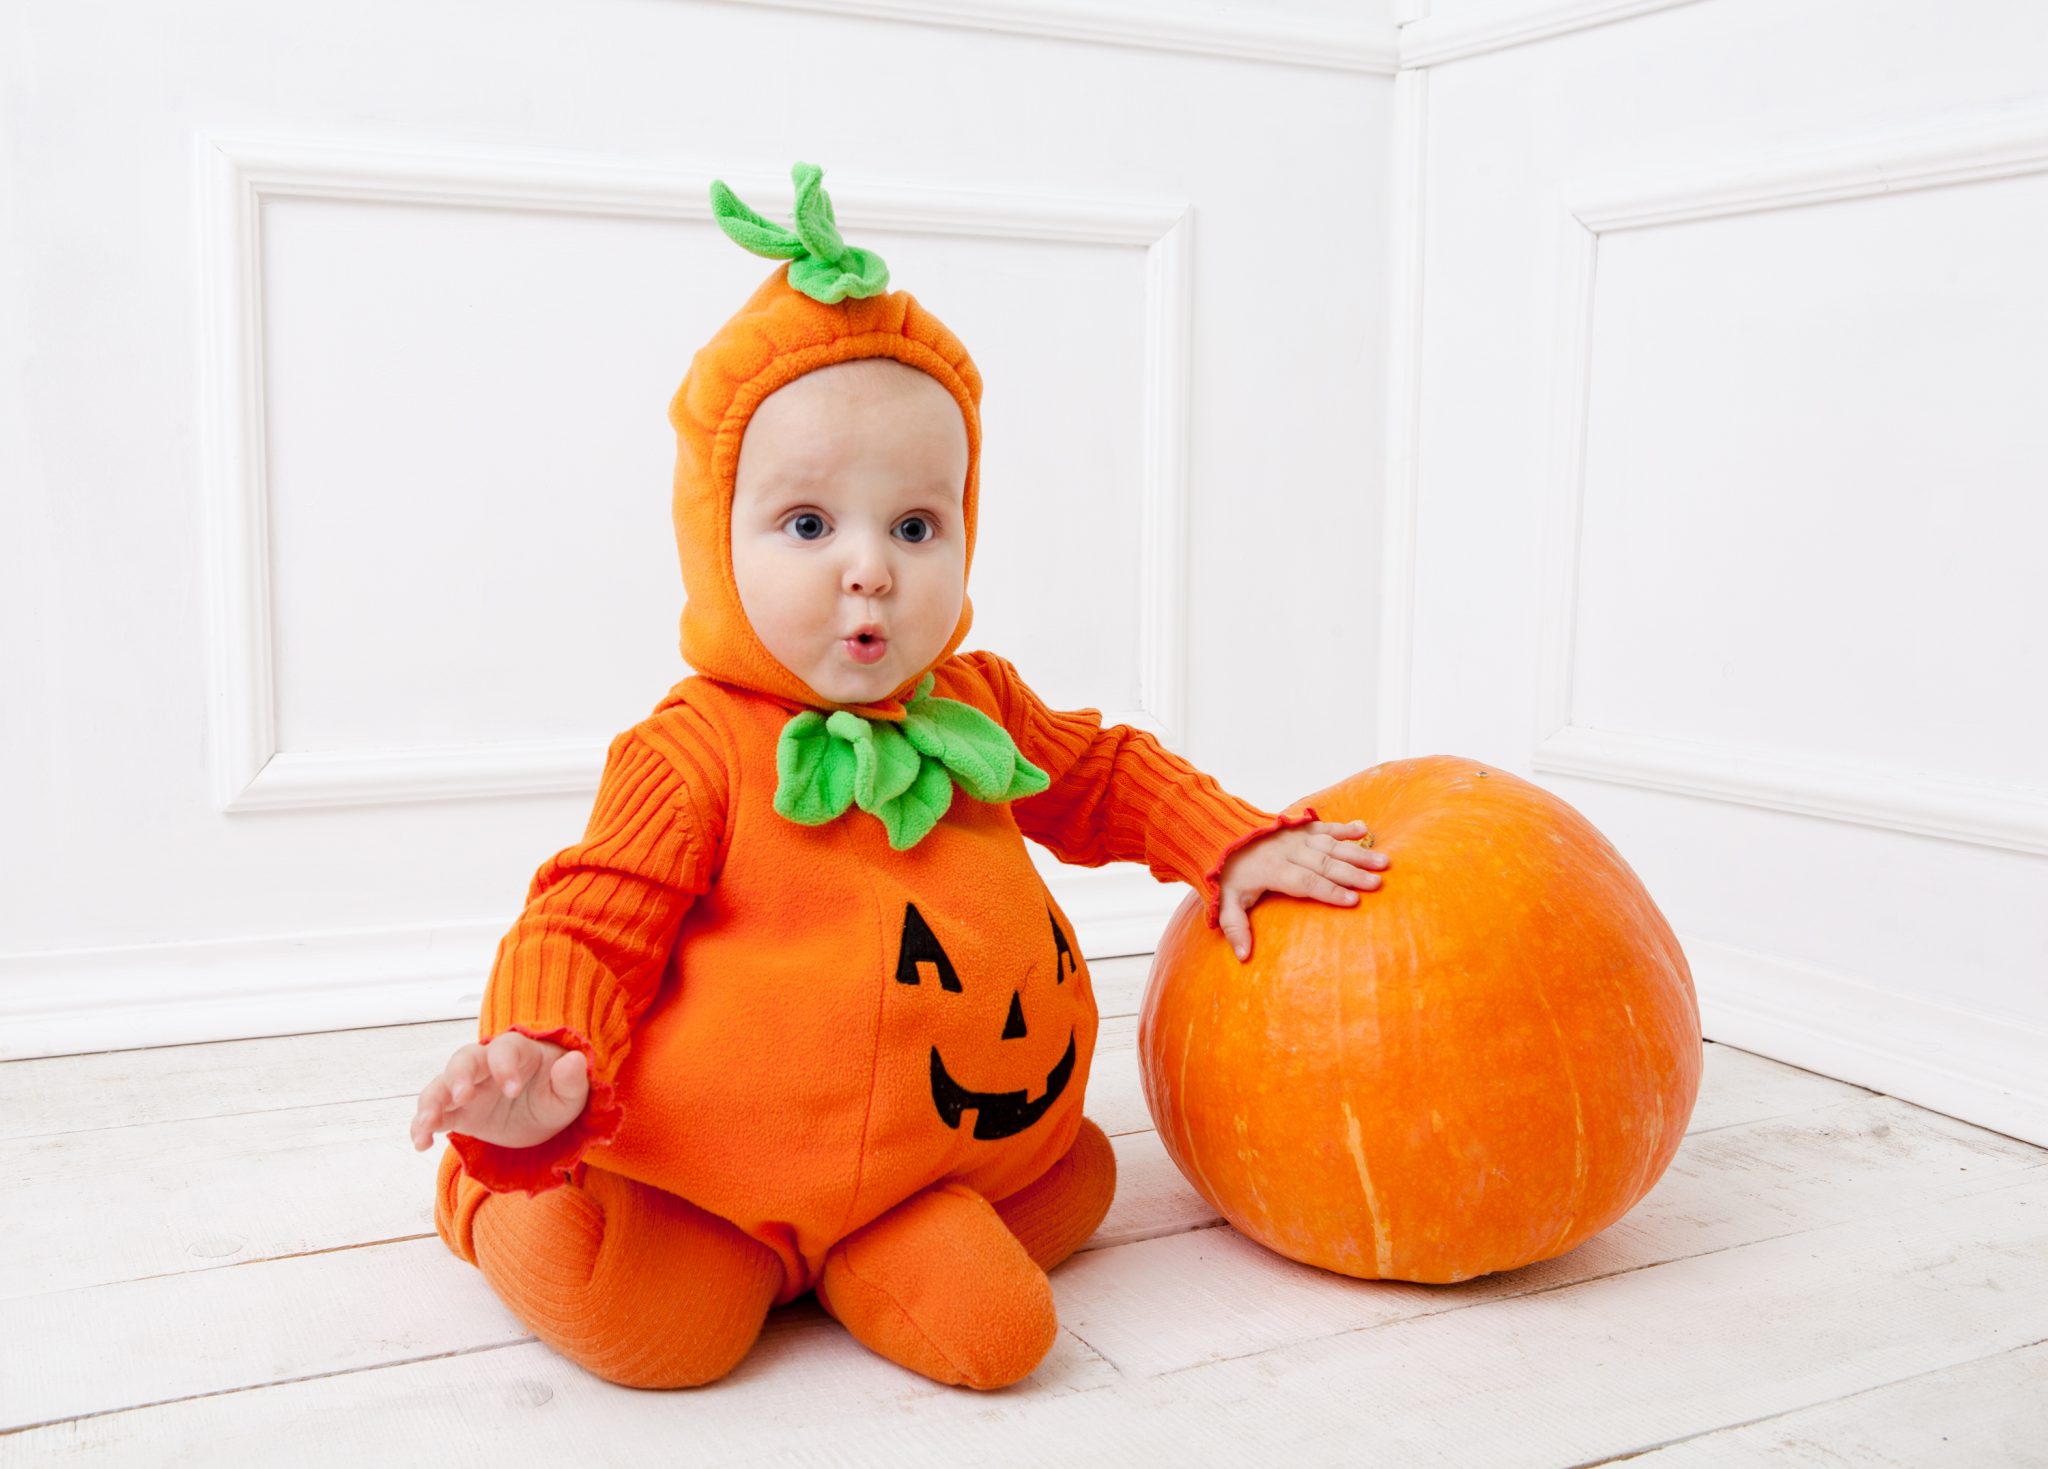 Here’s a great way to turn pumpkin carving into a beautiful baby momento